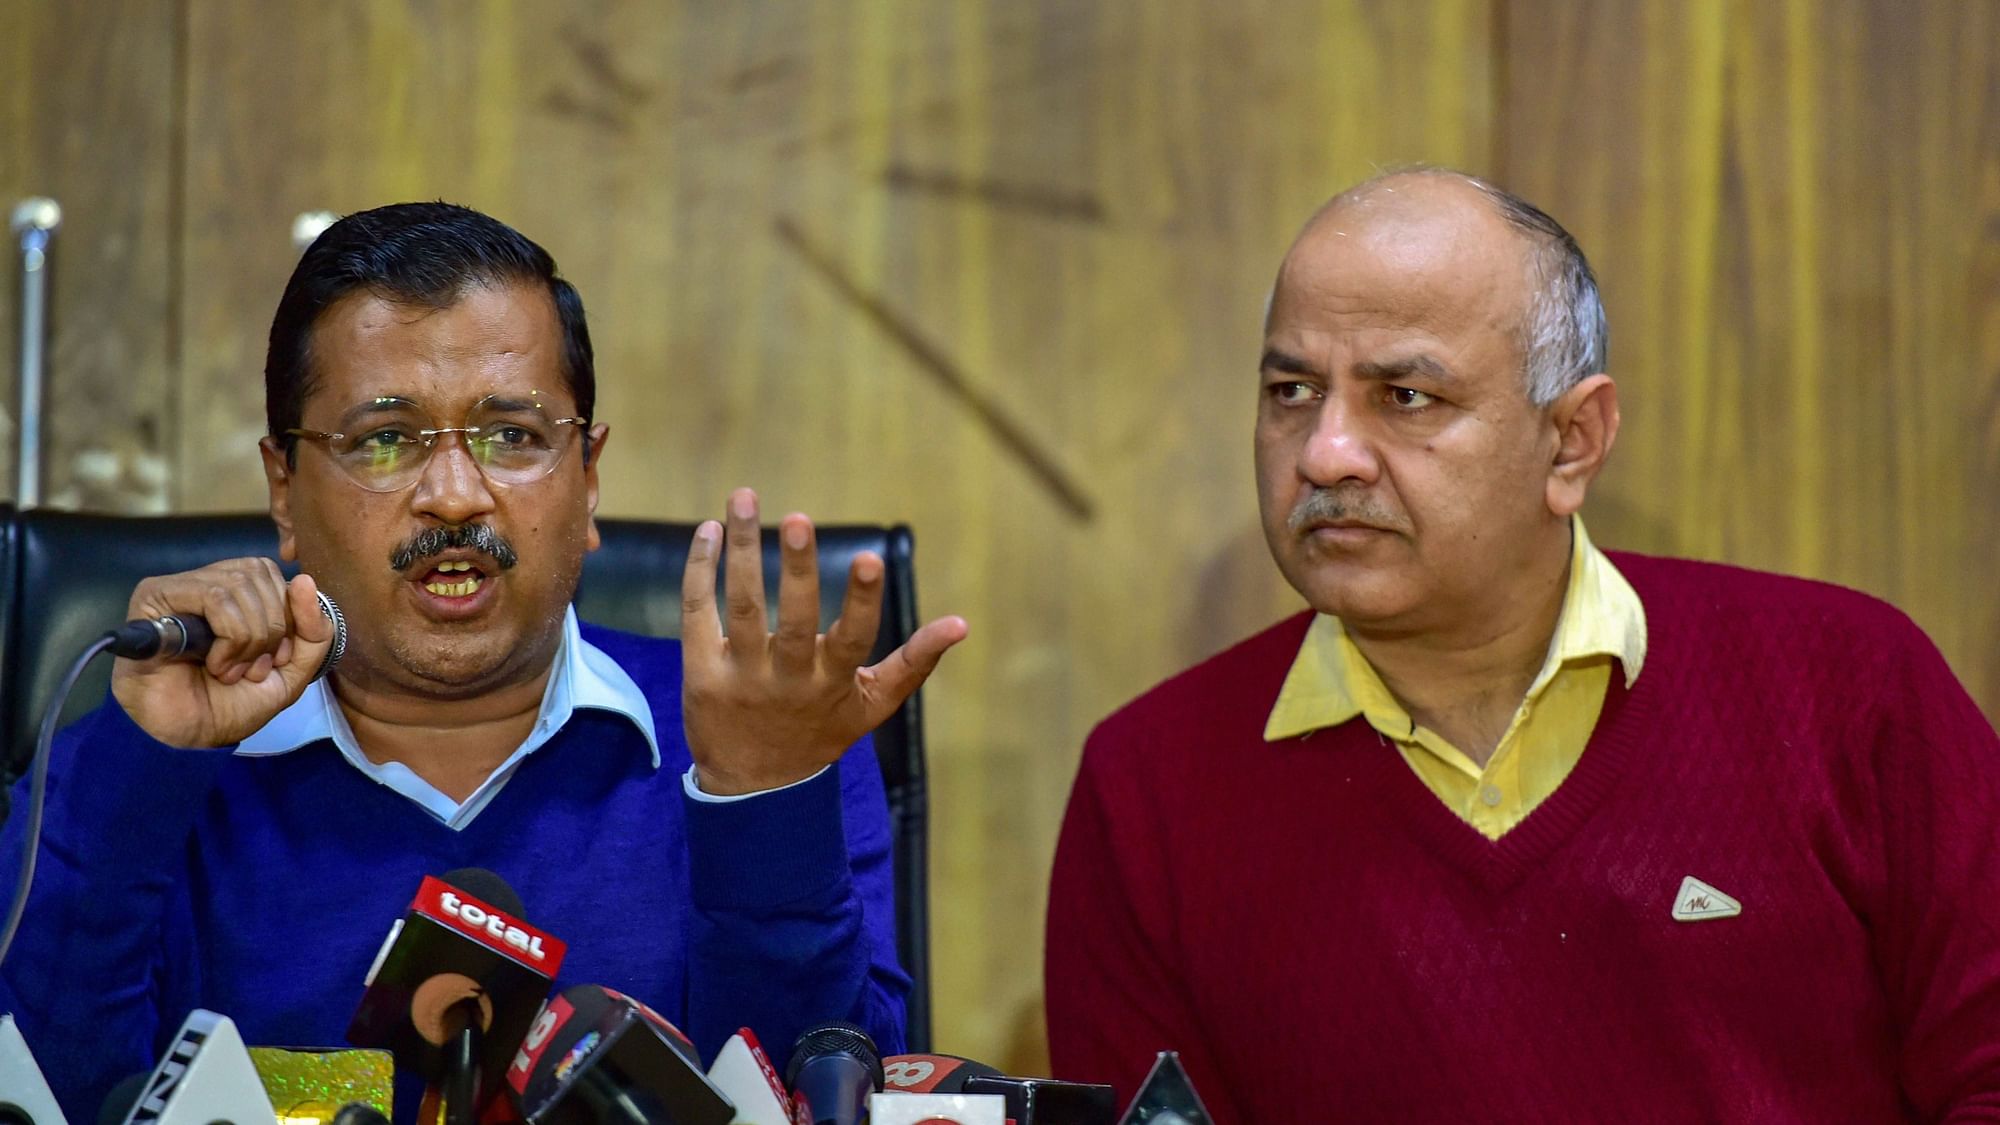 <div class="paragraphs"><p>News of the CBI raiding the residence of AAP leader and Delhi Deputy CM Manish Sisodia was met with a diverse range of reactions from across the political spectrum.</p></div>